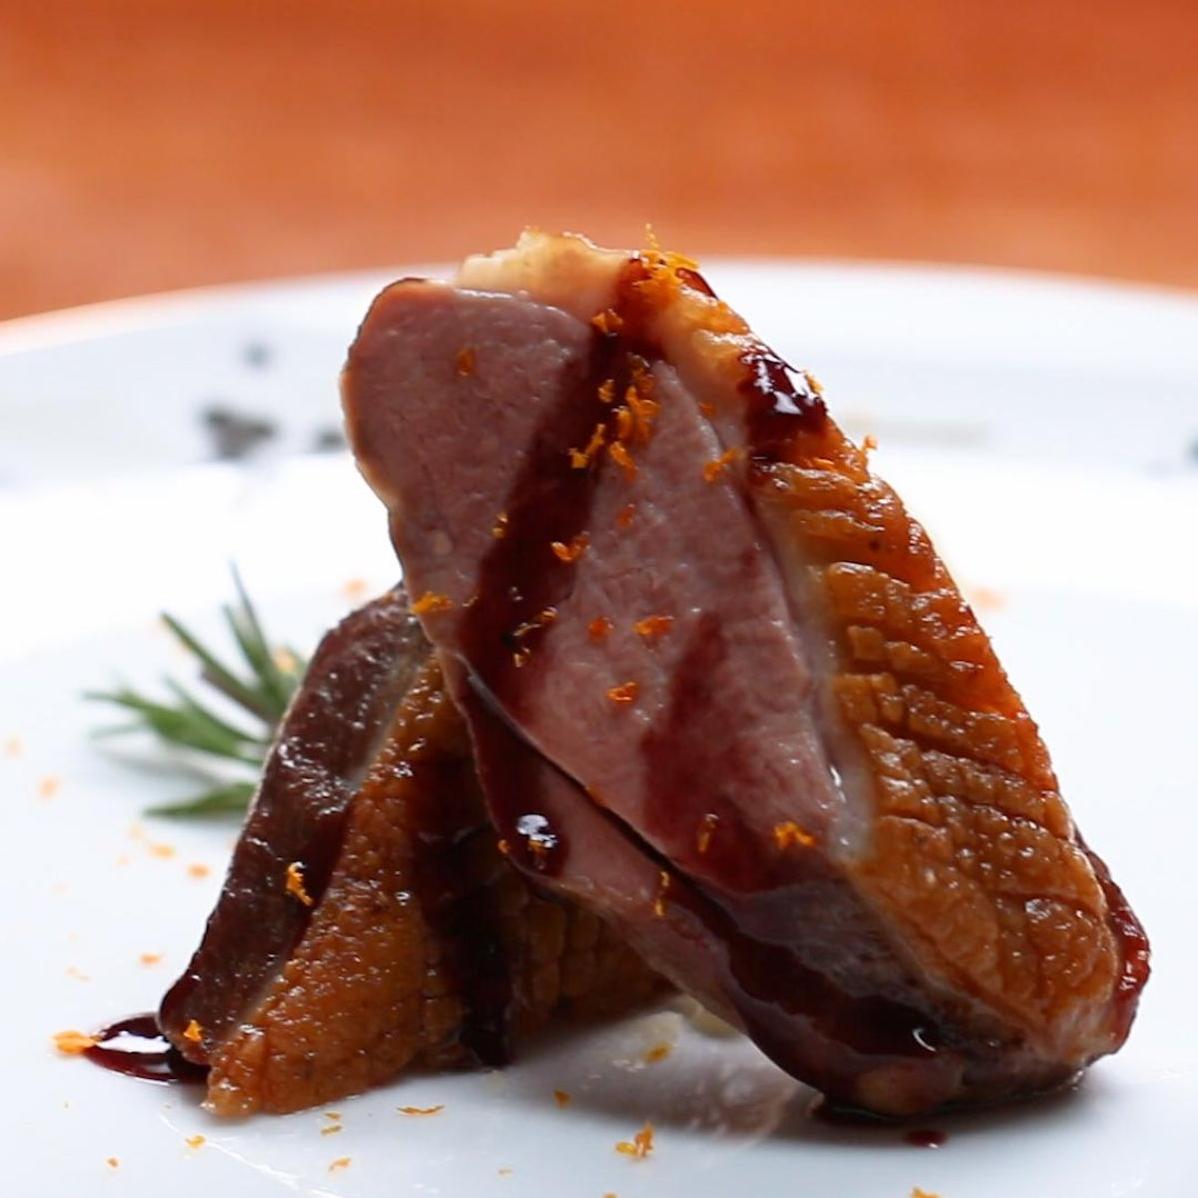  A match made in heaven - duck, marmalade, and wine.